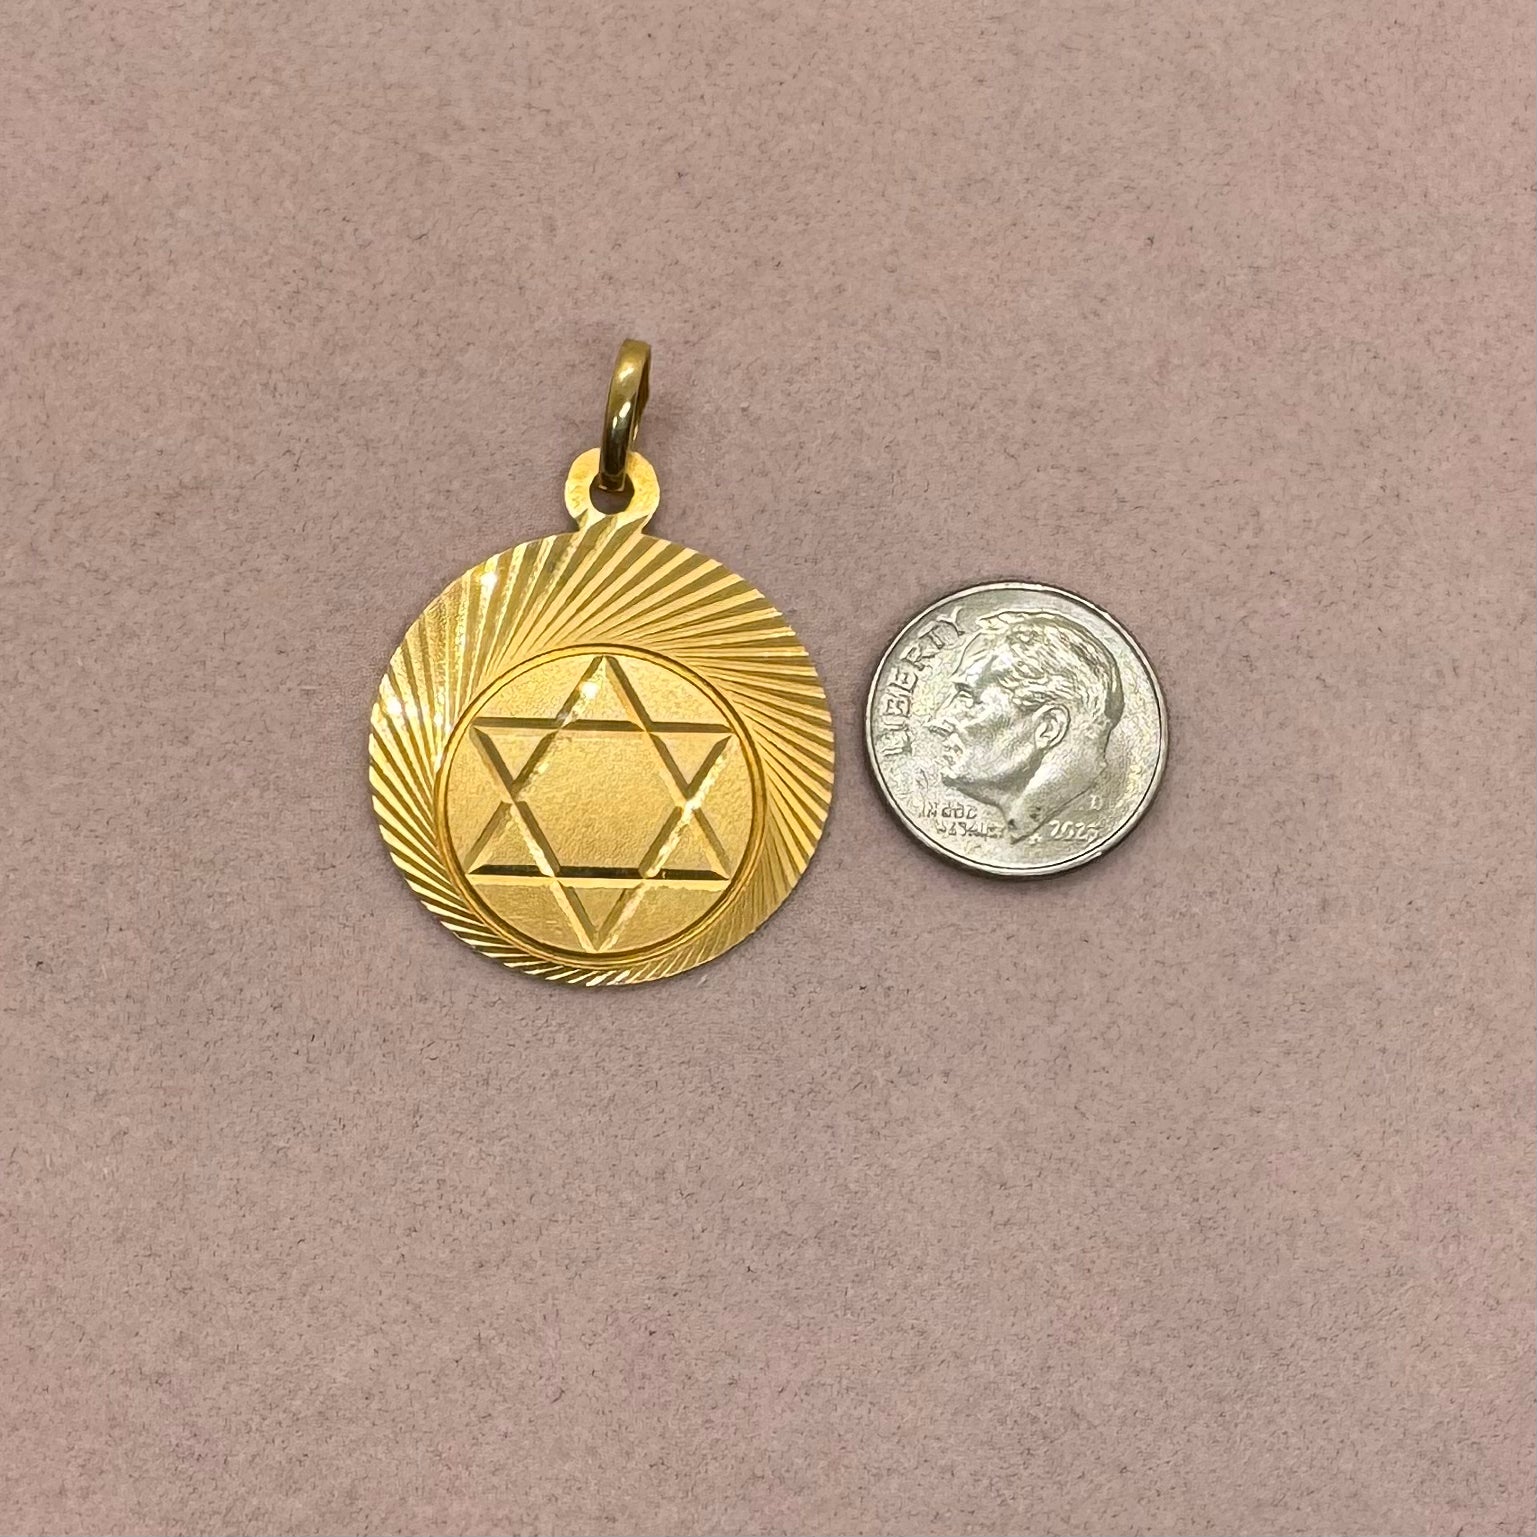 Radiant Star of David Medallion by Uno a Erre